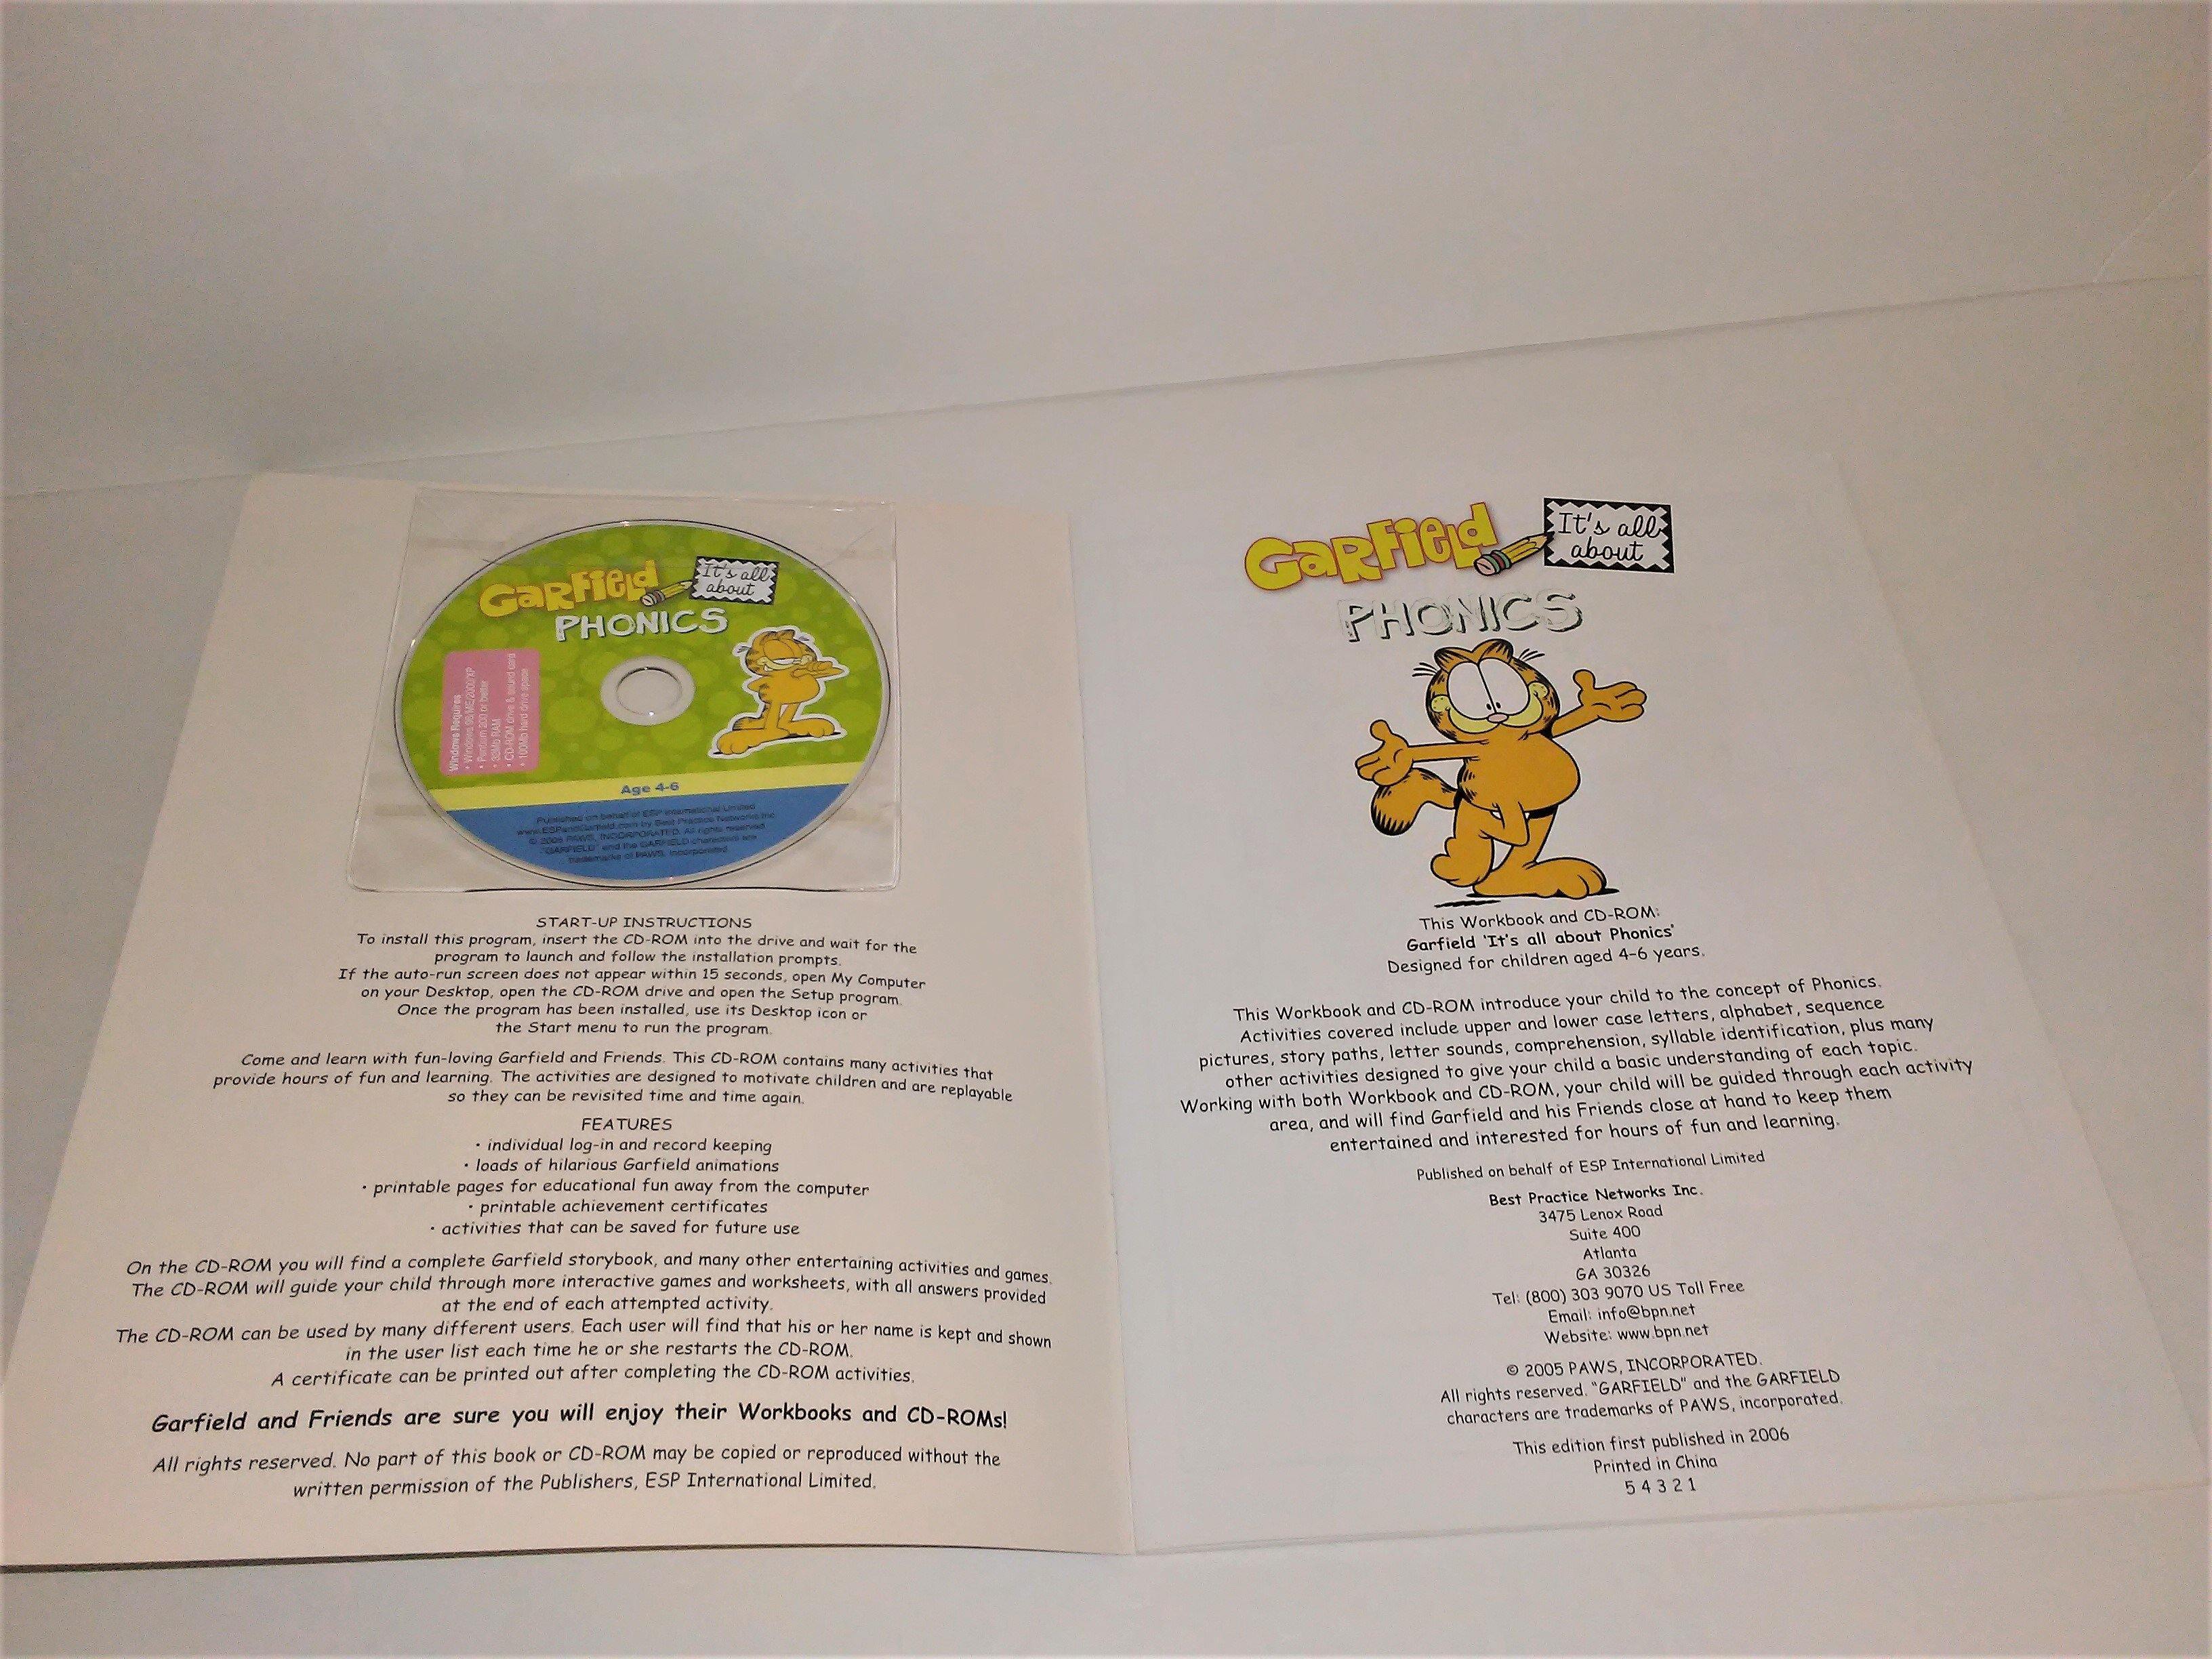 PHONICS　About　–　CD-ROM　Memories　All　from　2006　Workbook　Sandee's　GARFIELD　Collectibles　It's　and